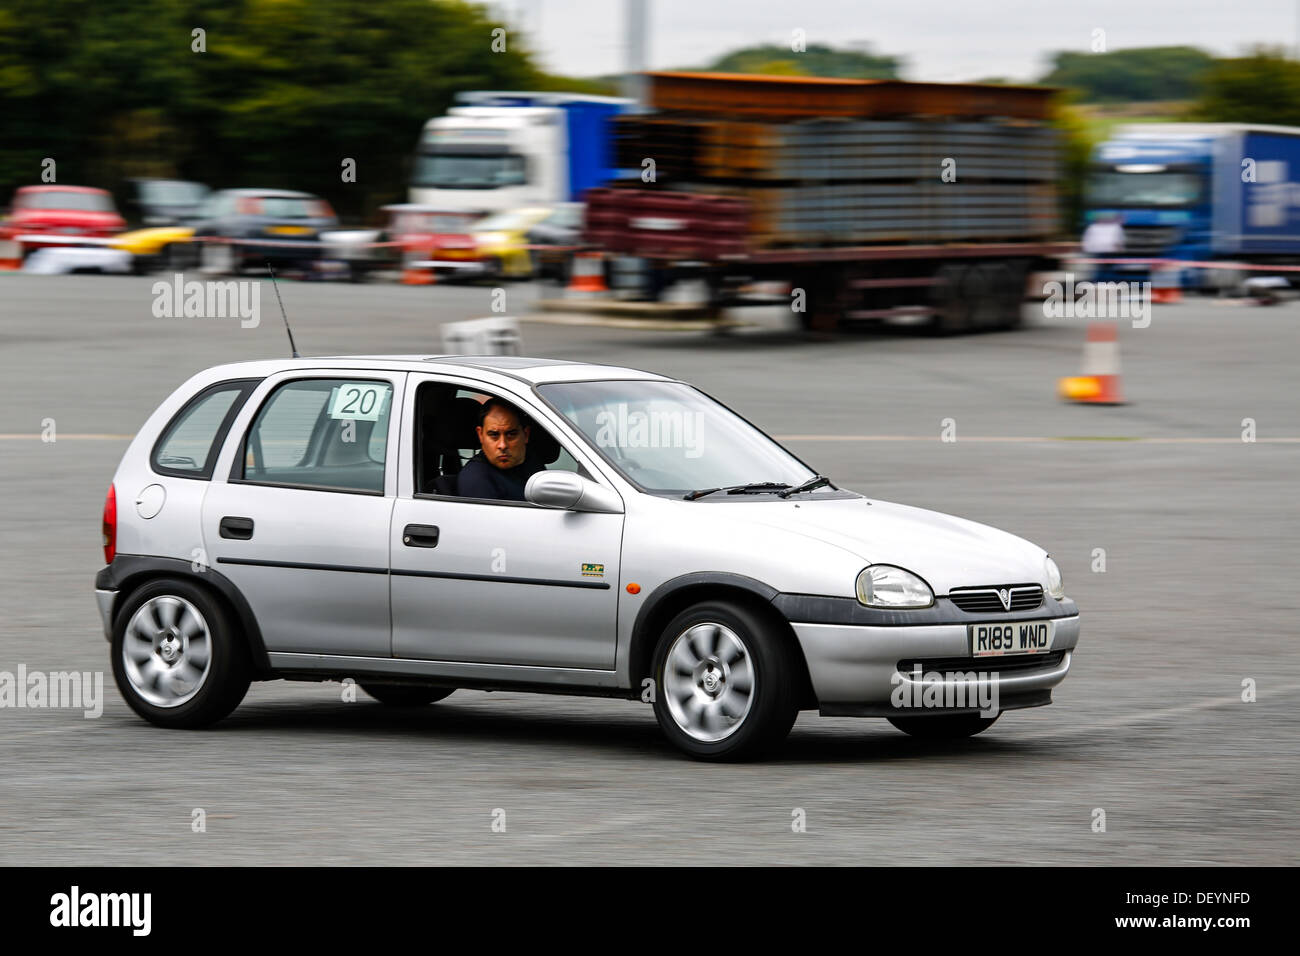 A car taking part in an AutoSolo at Strensham Services on the M5. Stock Photo